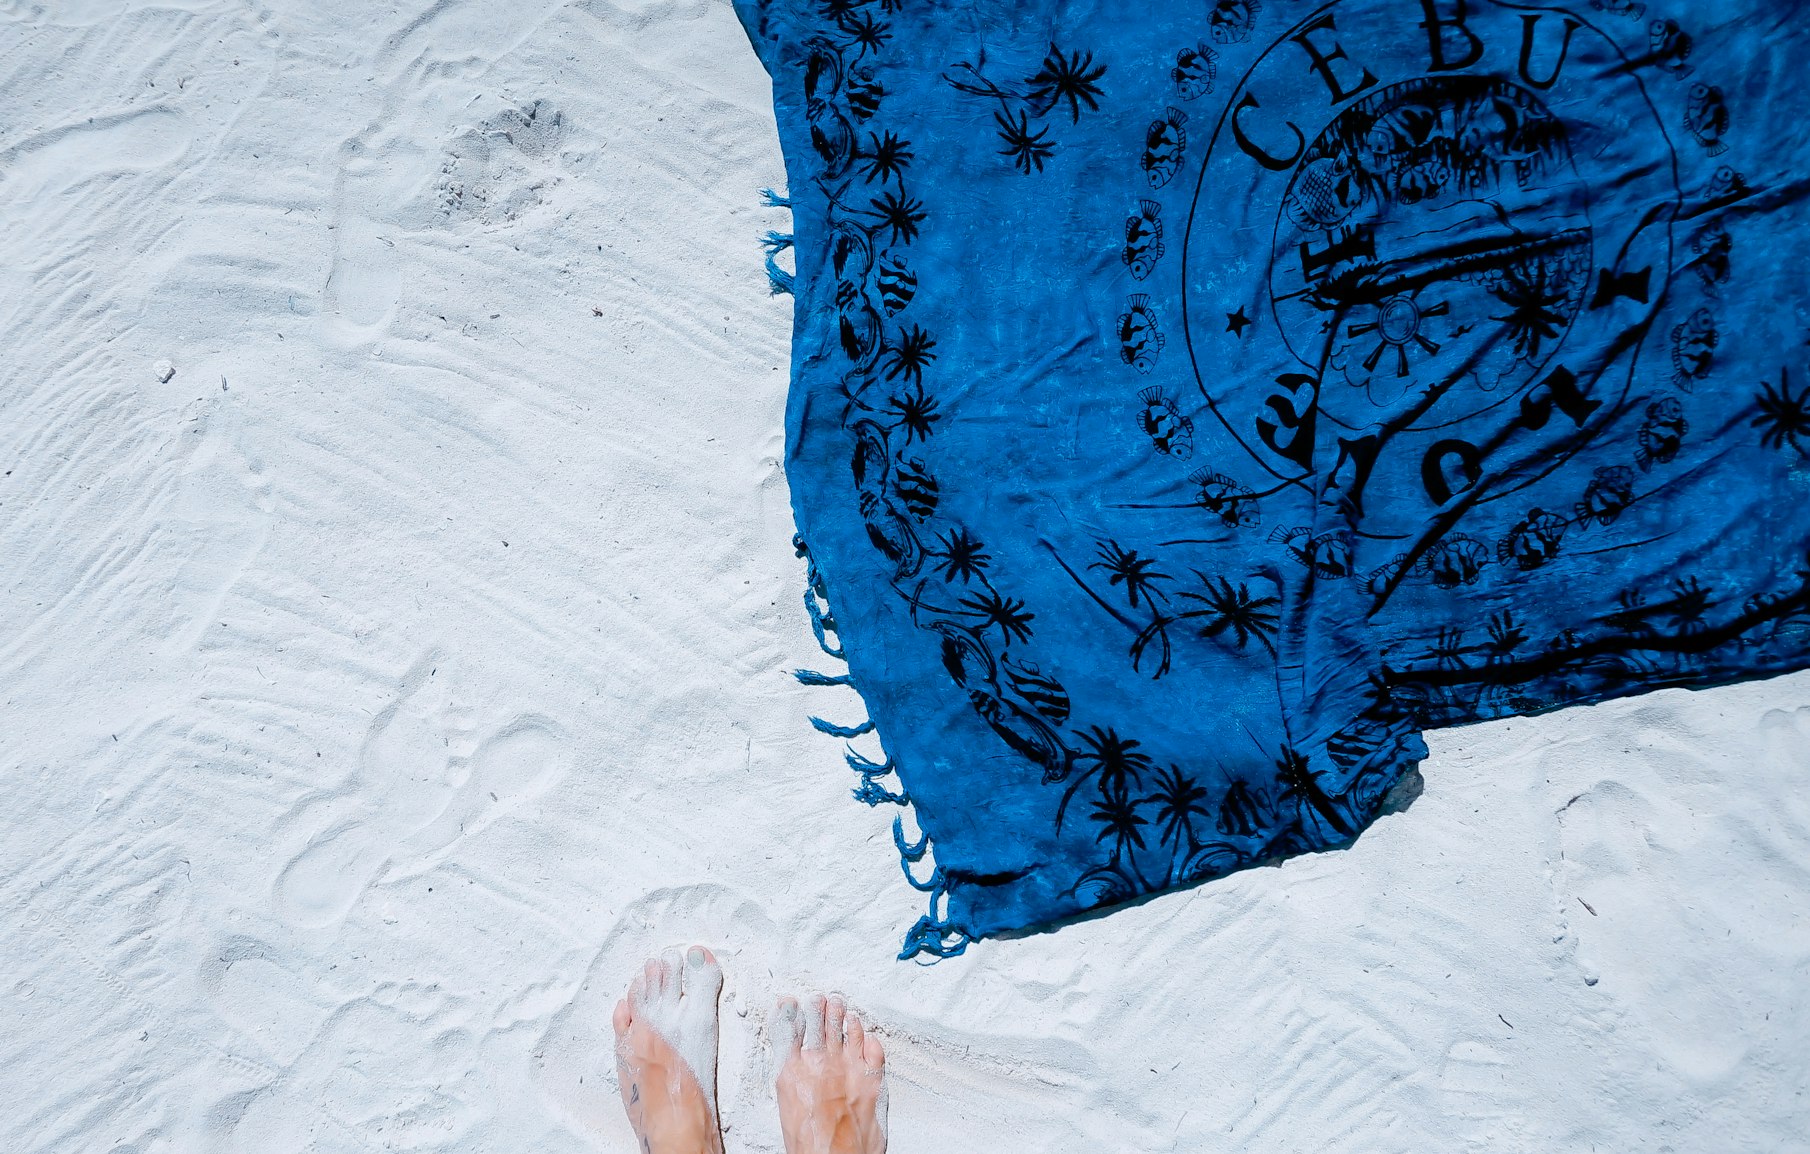 Summer Images & Pictures Holistic Health Images Towel Feet Warm Nature Images Outdoors Hd Teal Wallpapers Beach Images & Pictures Foulard Footprint Foot Barefoot Rug Circle Cobalt